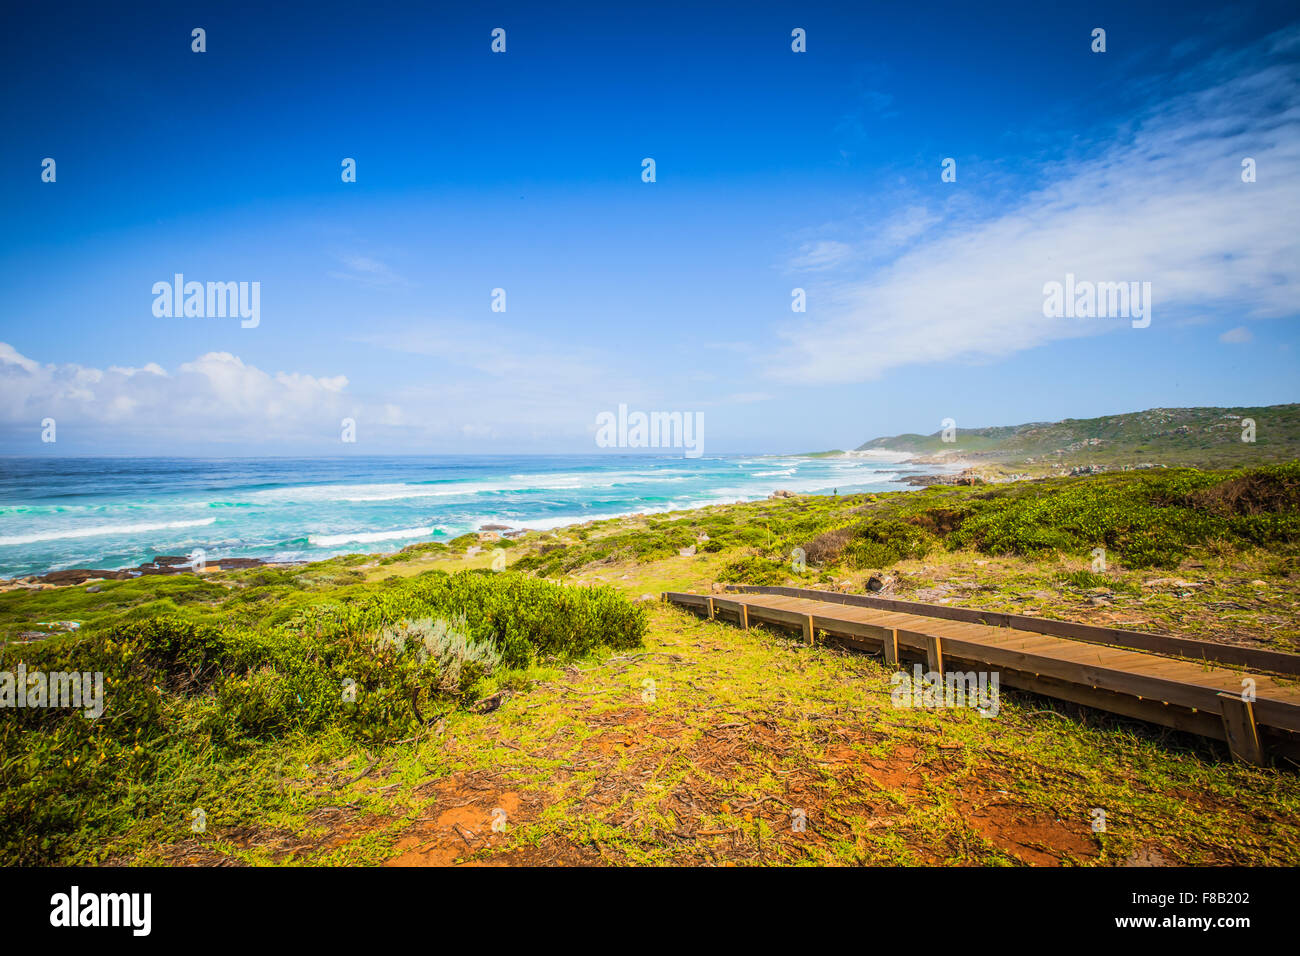 Landscapes of the Cape Point , South Africa Stock Photo